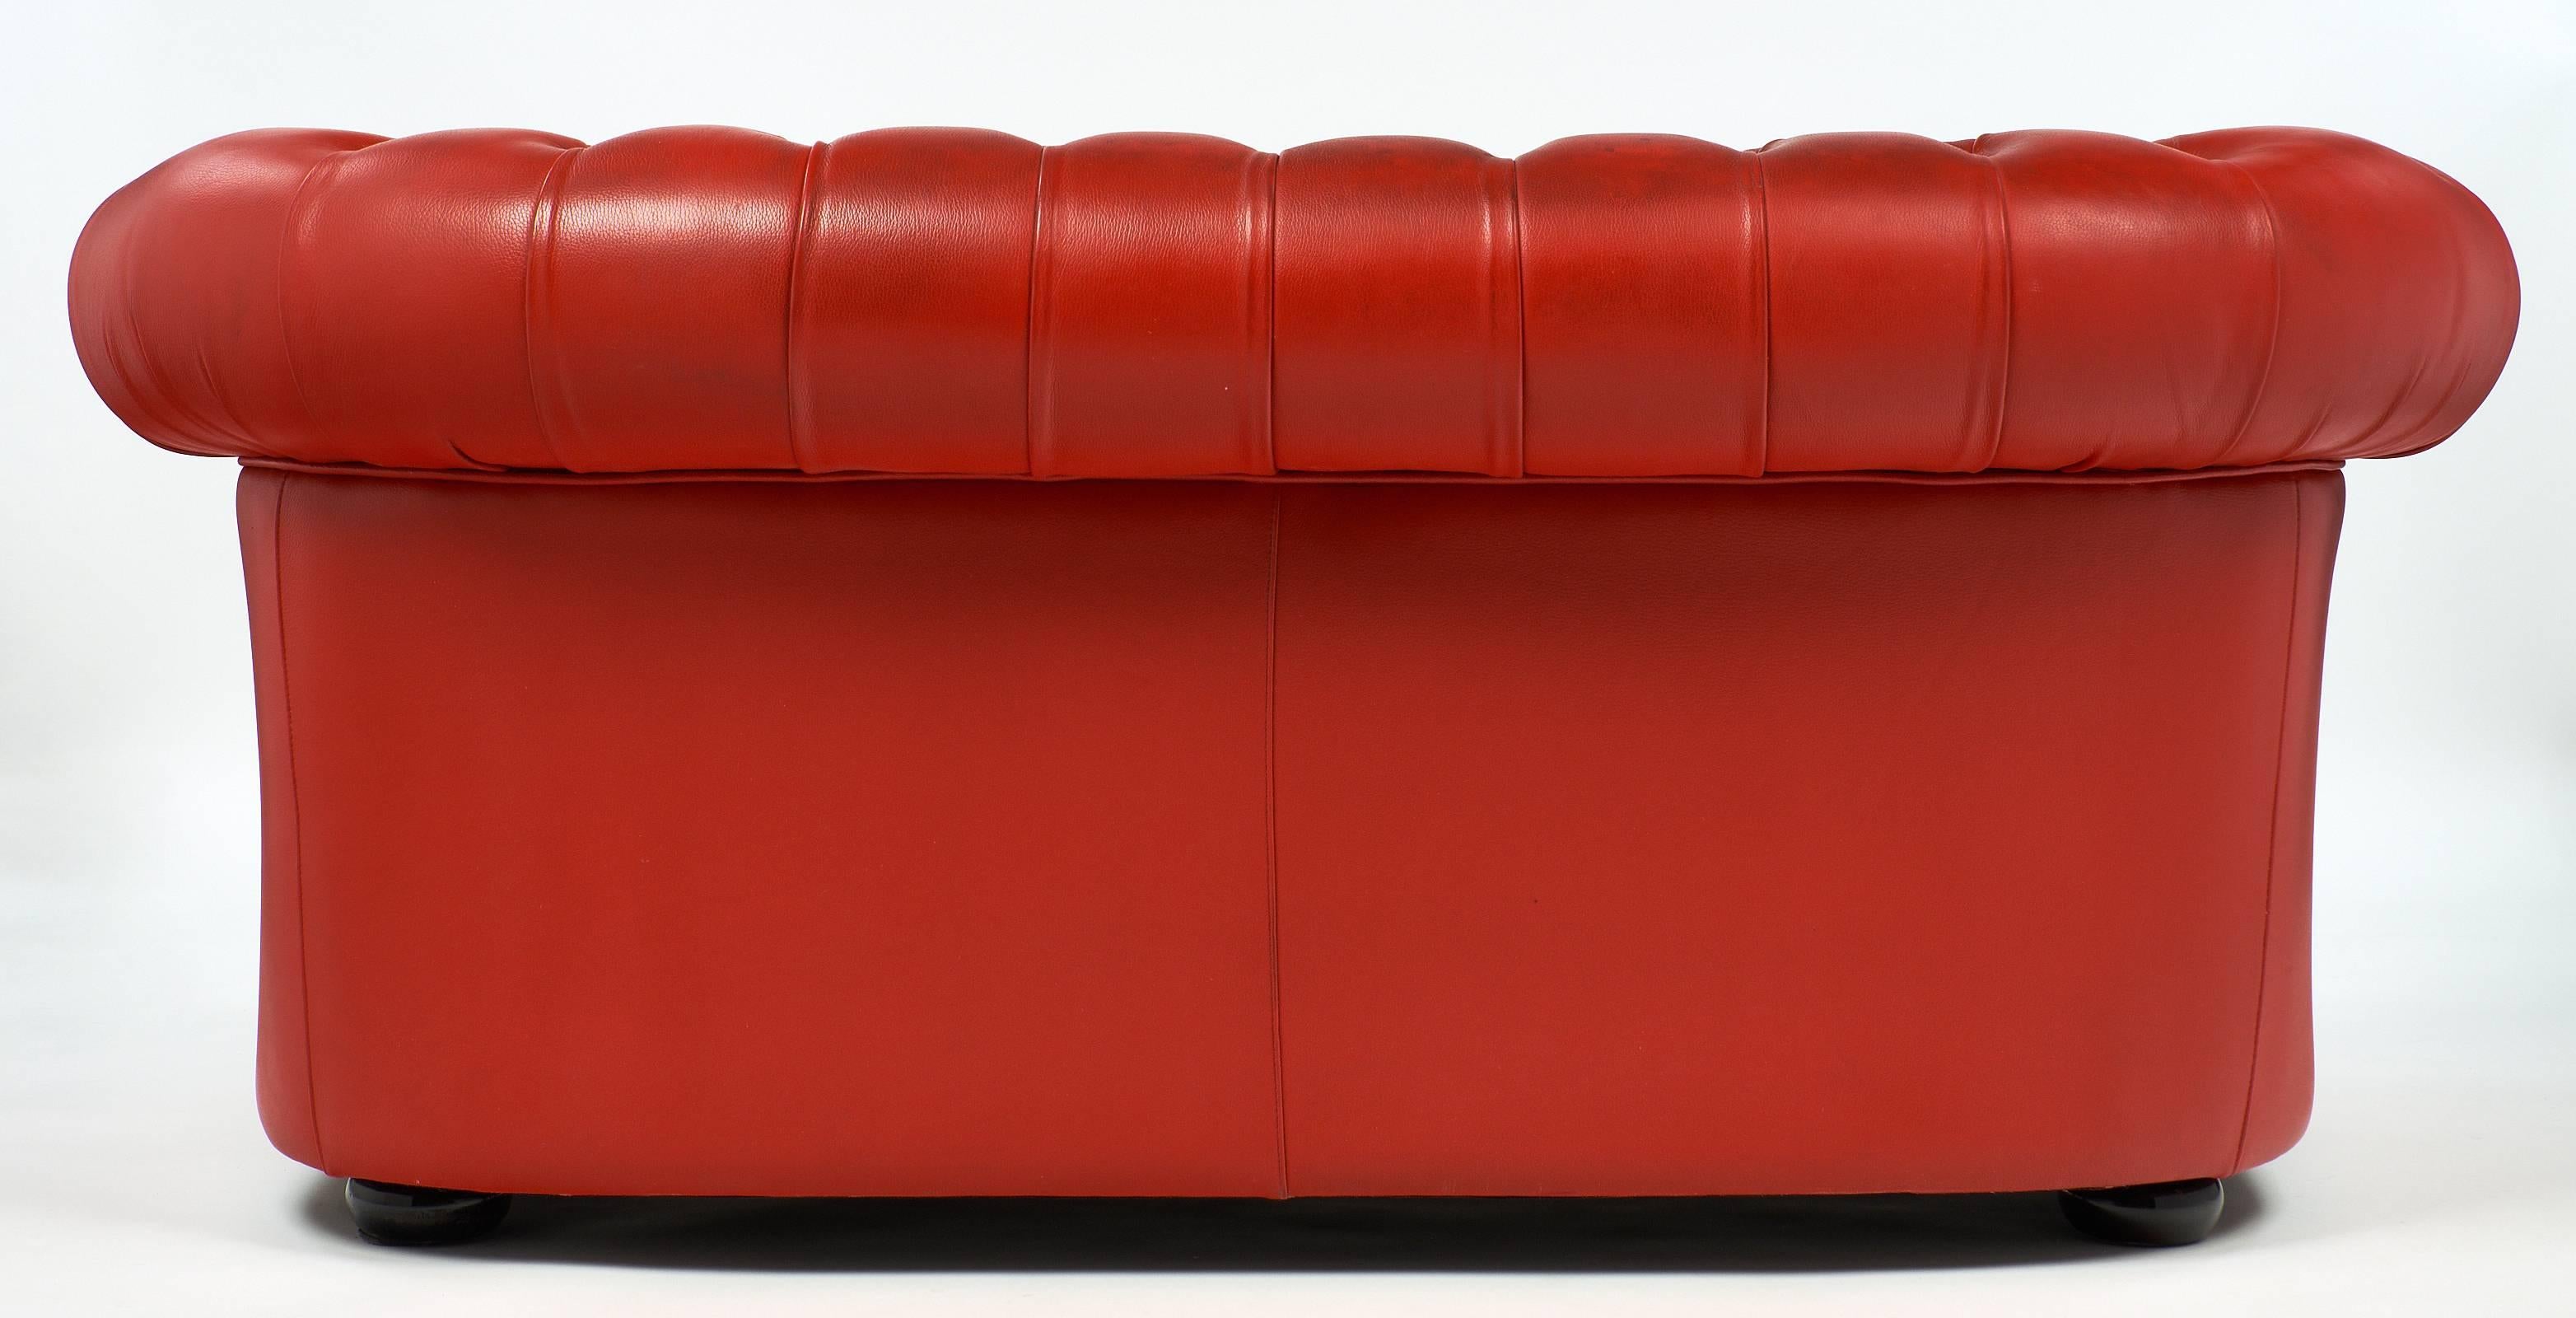 Vintage English Red Leather Chesterfield Couch 1